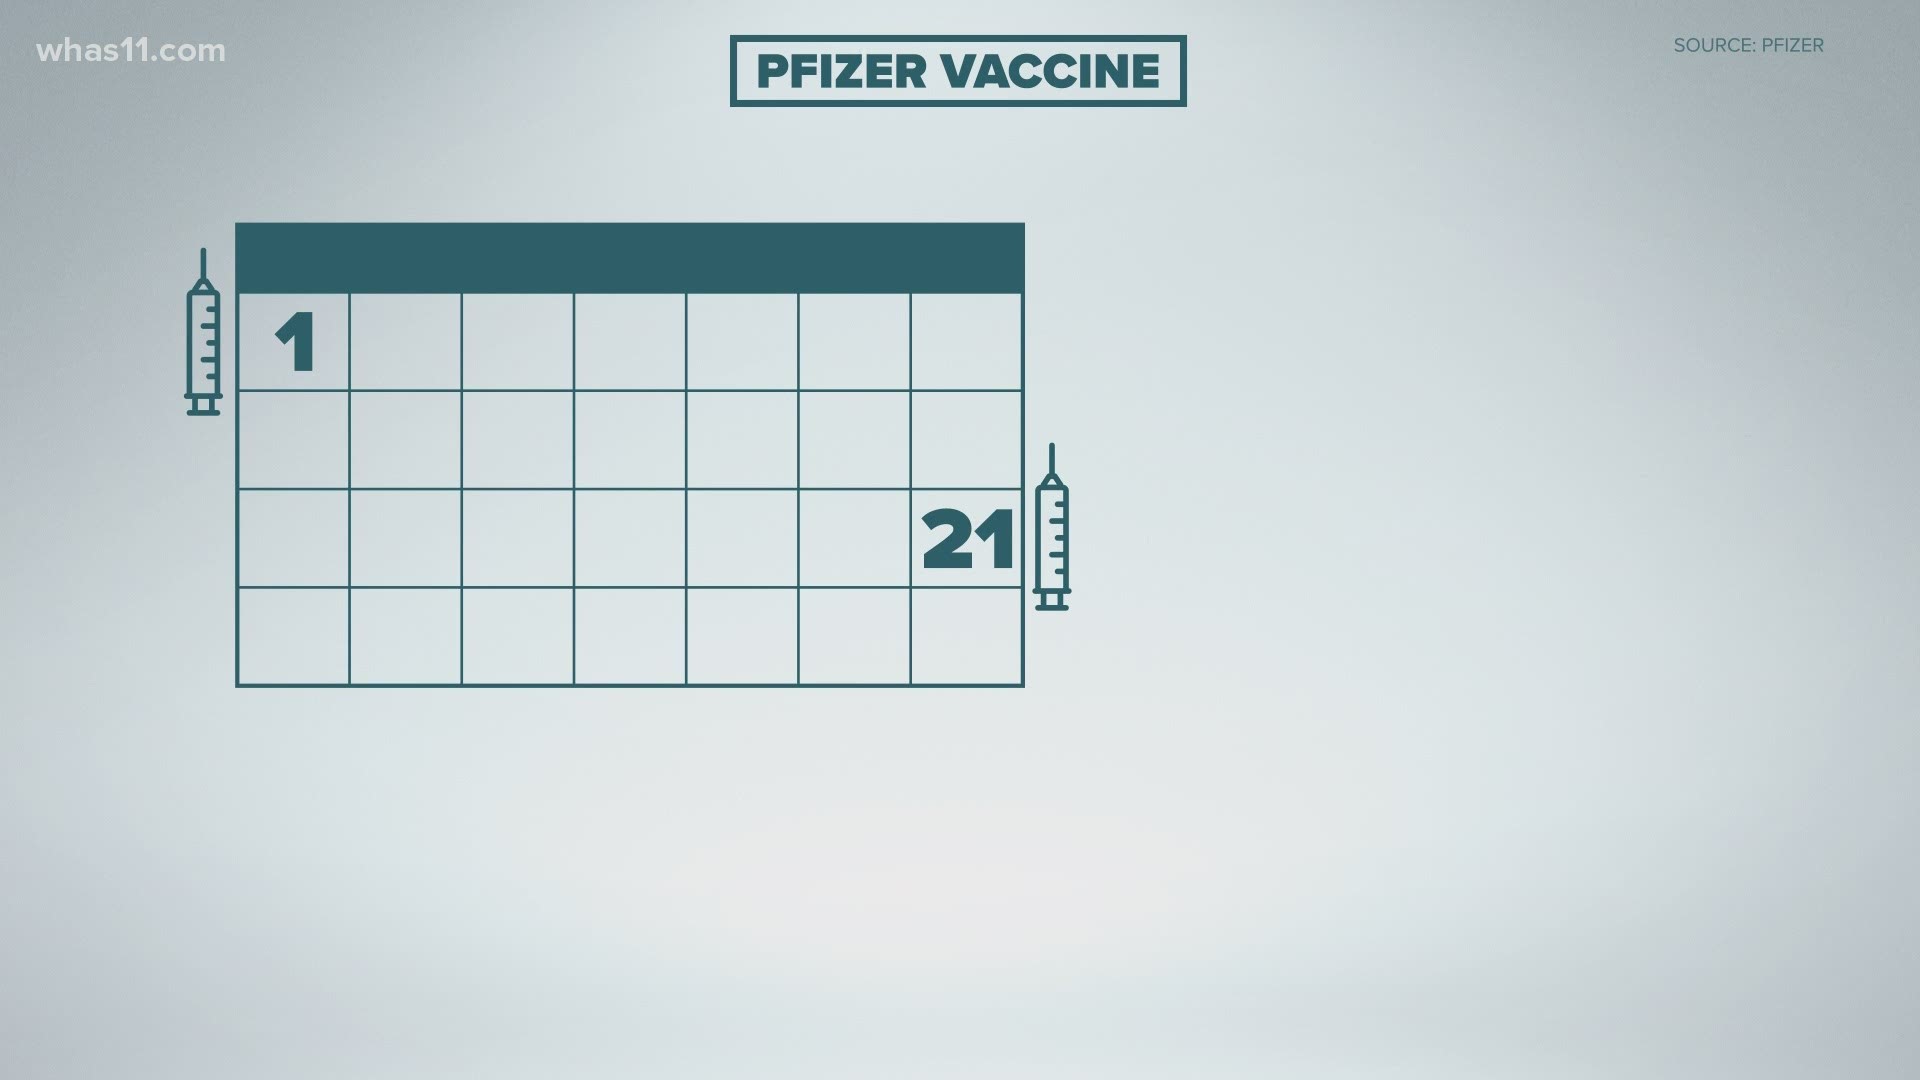 Here's a play by play of how the COVID-19 vaccine would work and distributed.